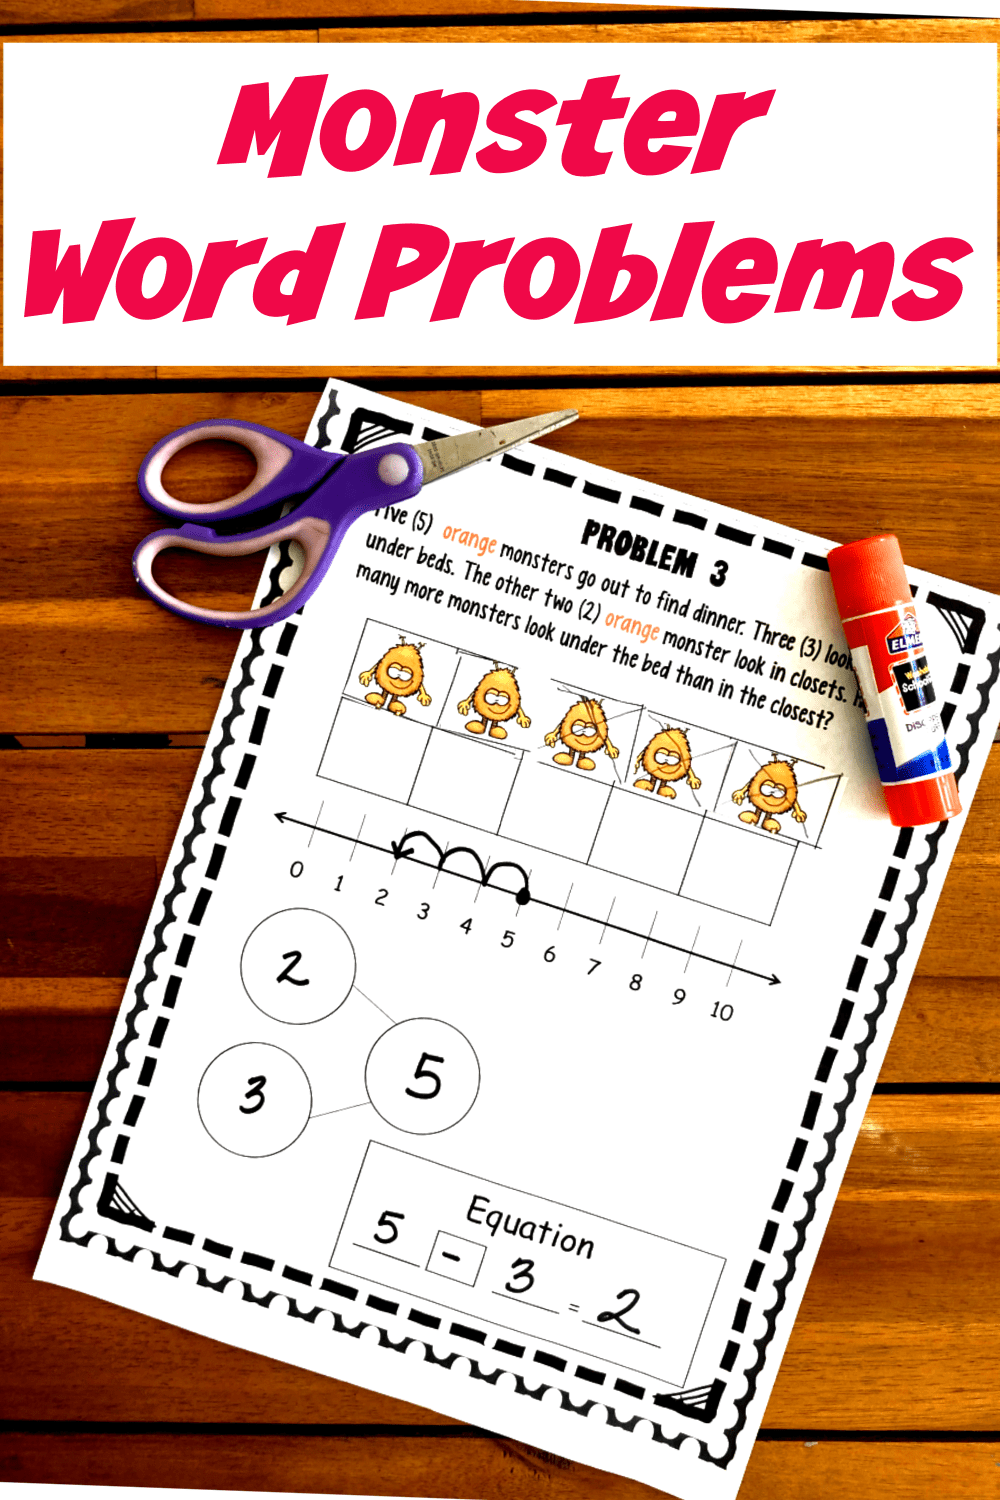 Monster word problems in 10 worksheets with monster pictures glued to the worksheet and a glue stick. 